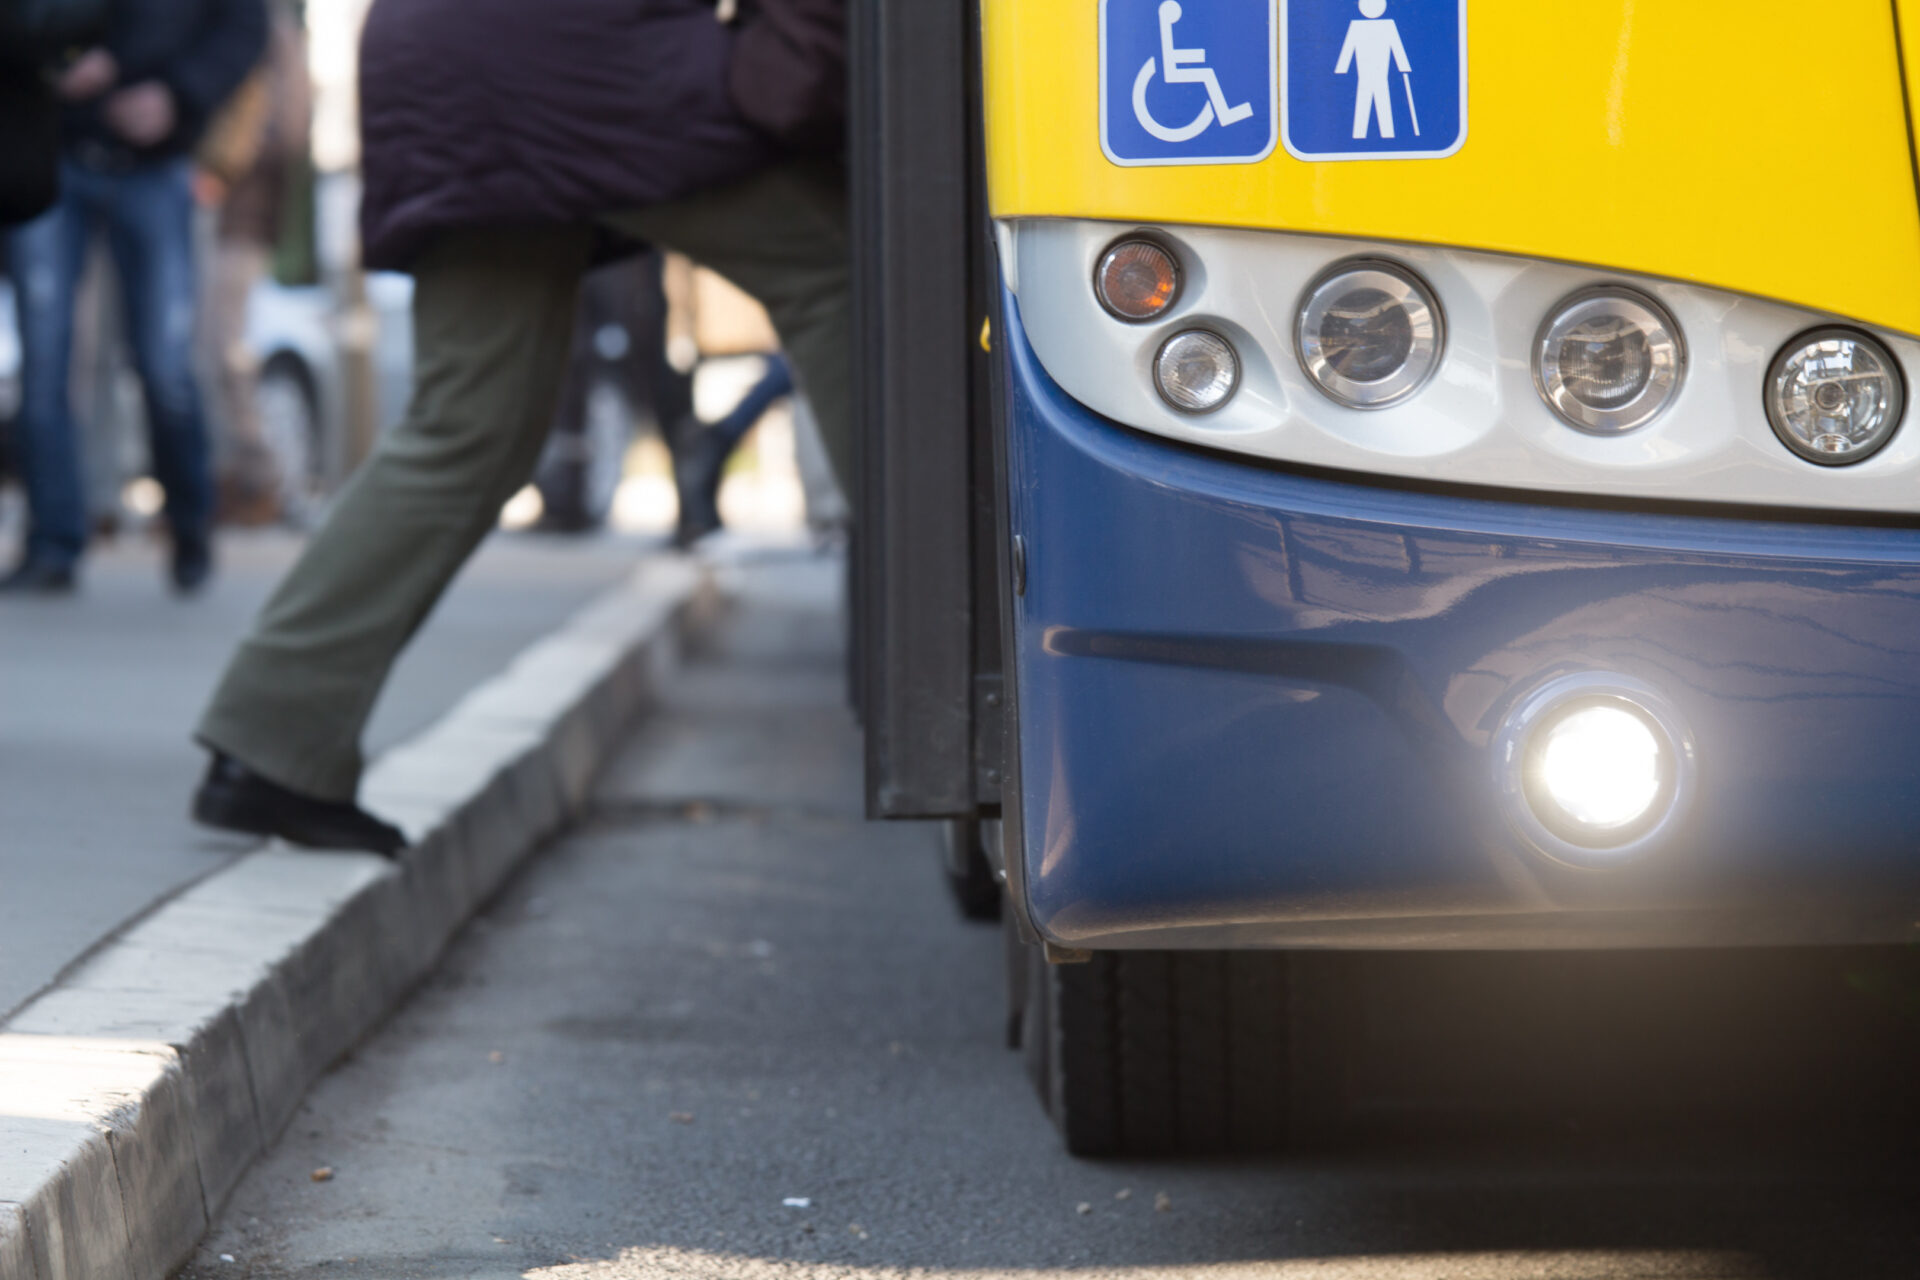 A person with a disability confidently boarding a bus displaying a handicap sign, exemplifying inclusive and accessible public transportation.